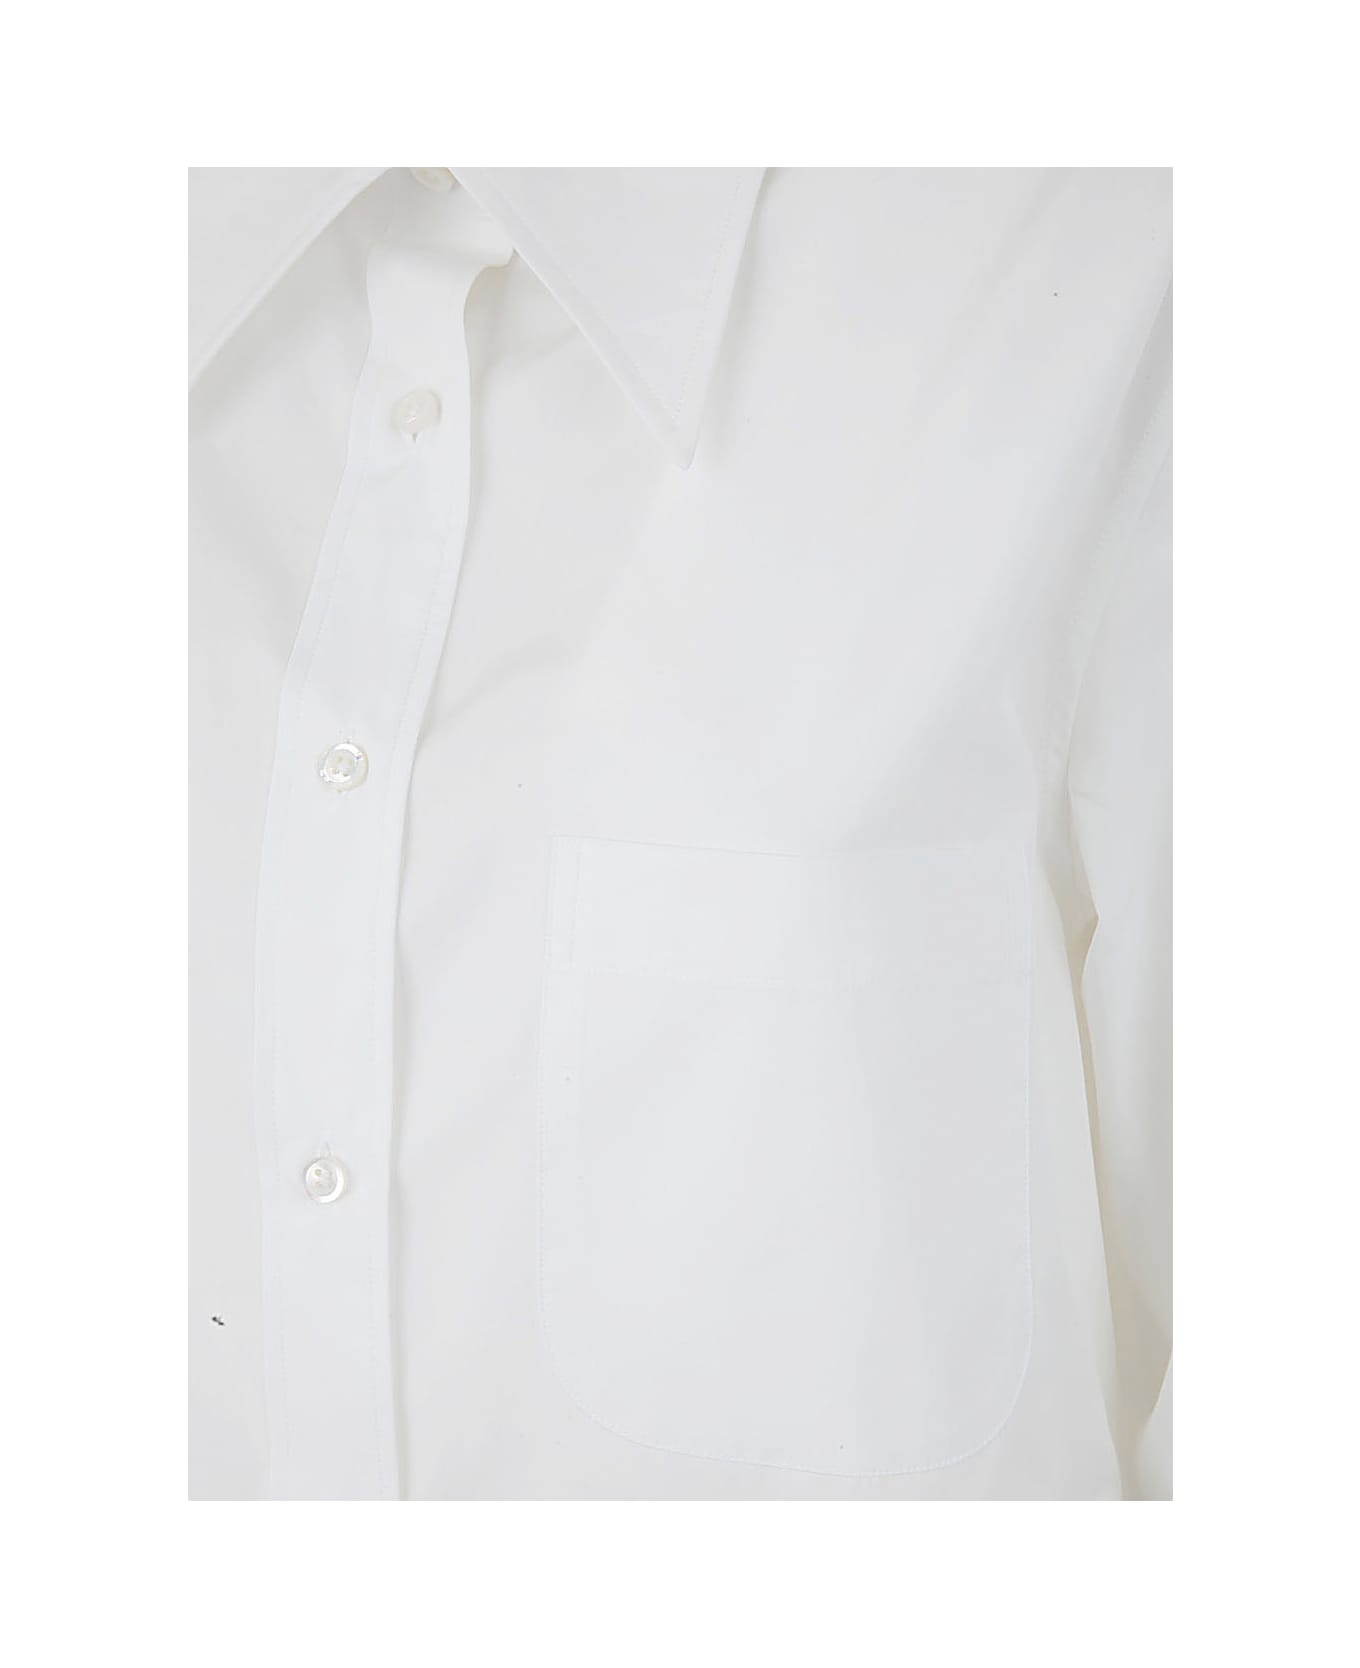 Thom Browne Exaggerated Easy Fit Point Collar Shirt In Poplin - White